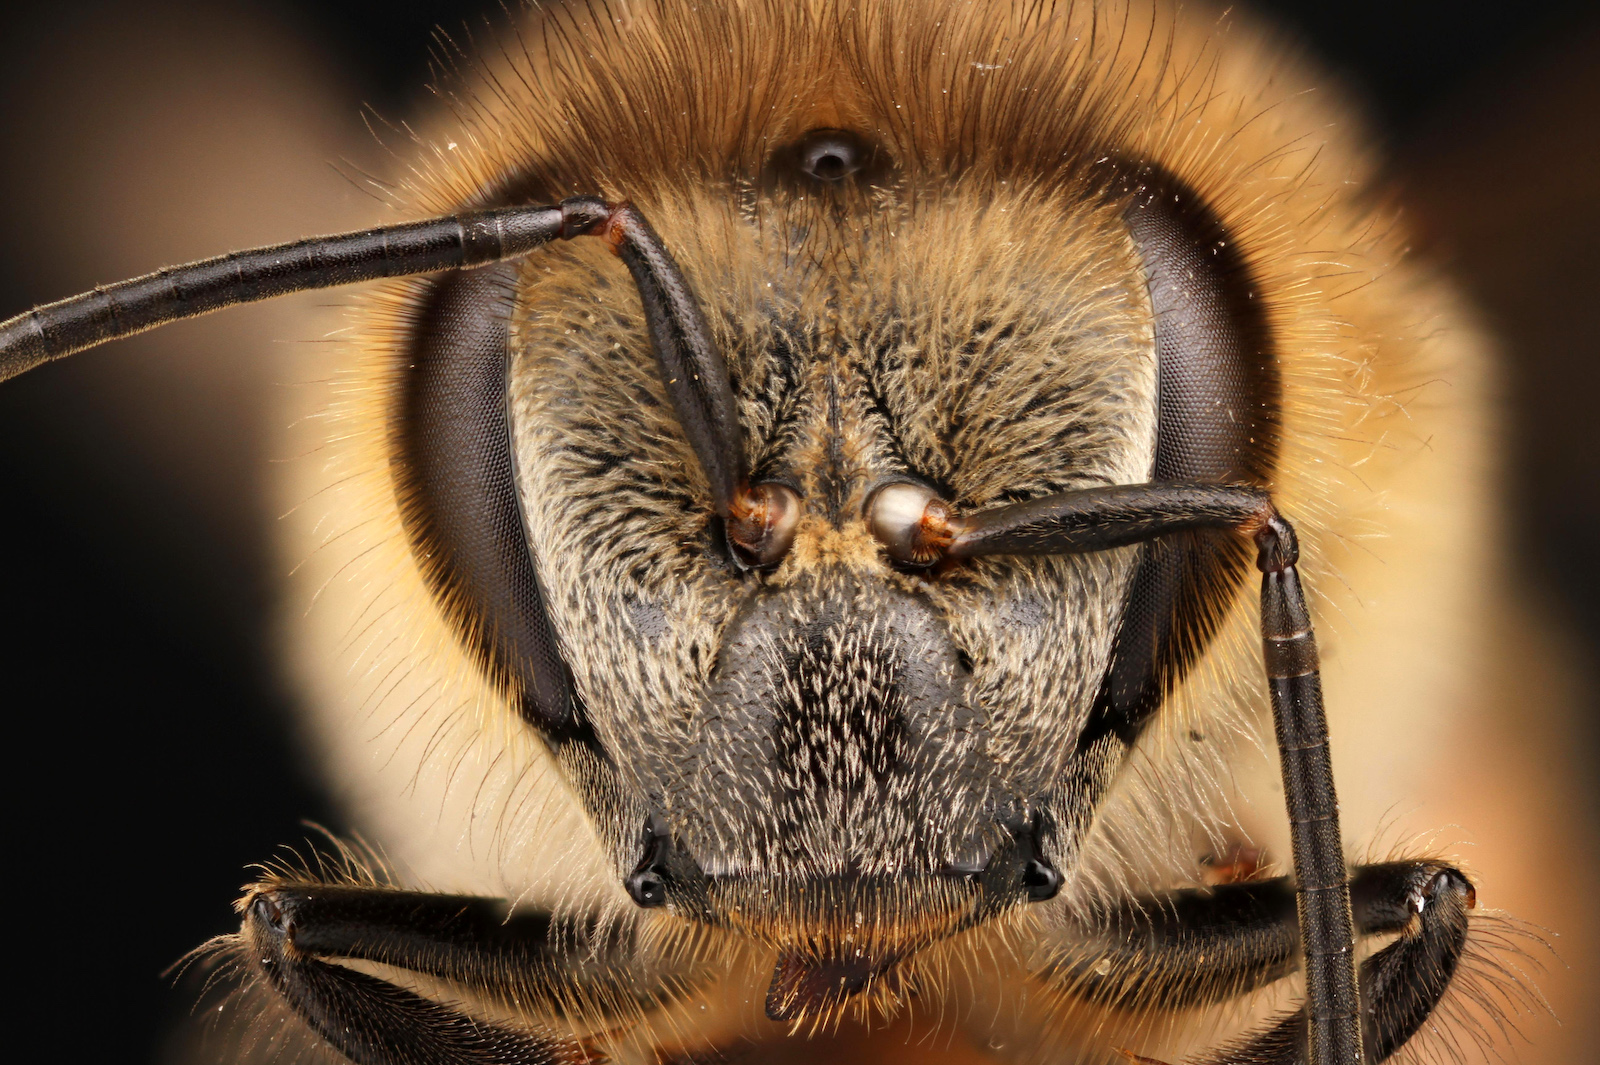 Bumblebees have an incredible sense of smell to find their way